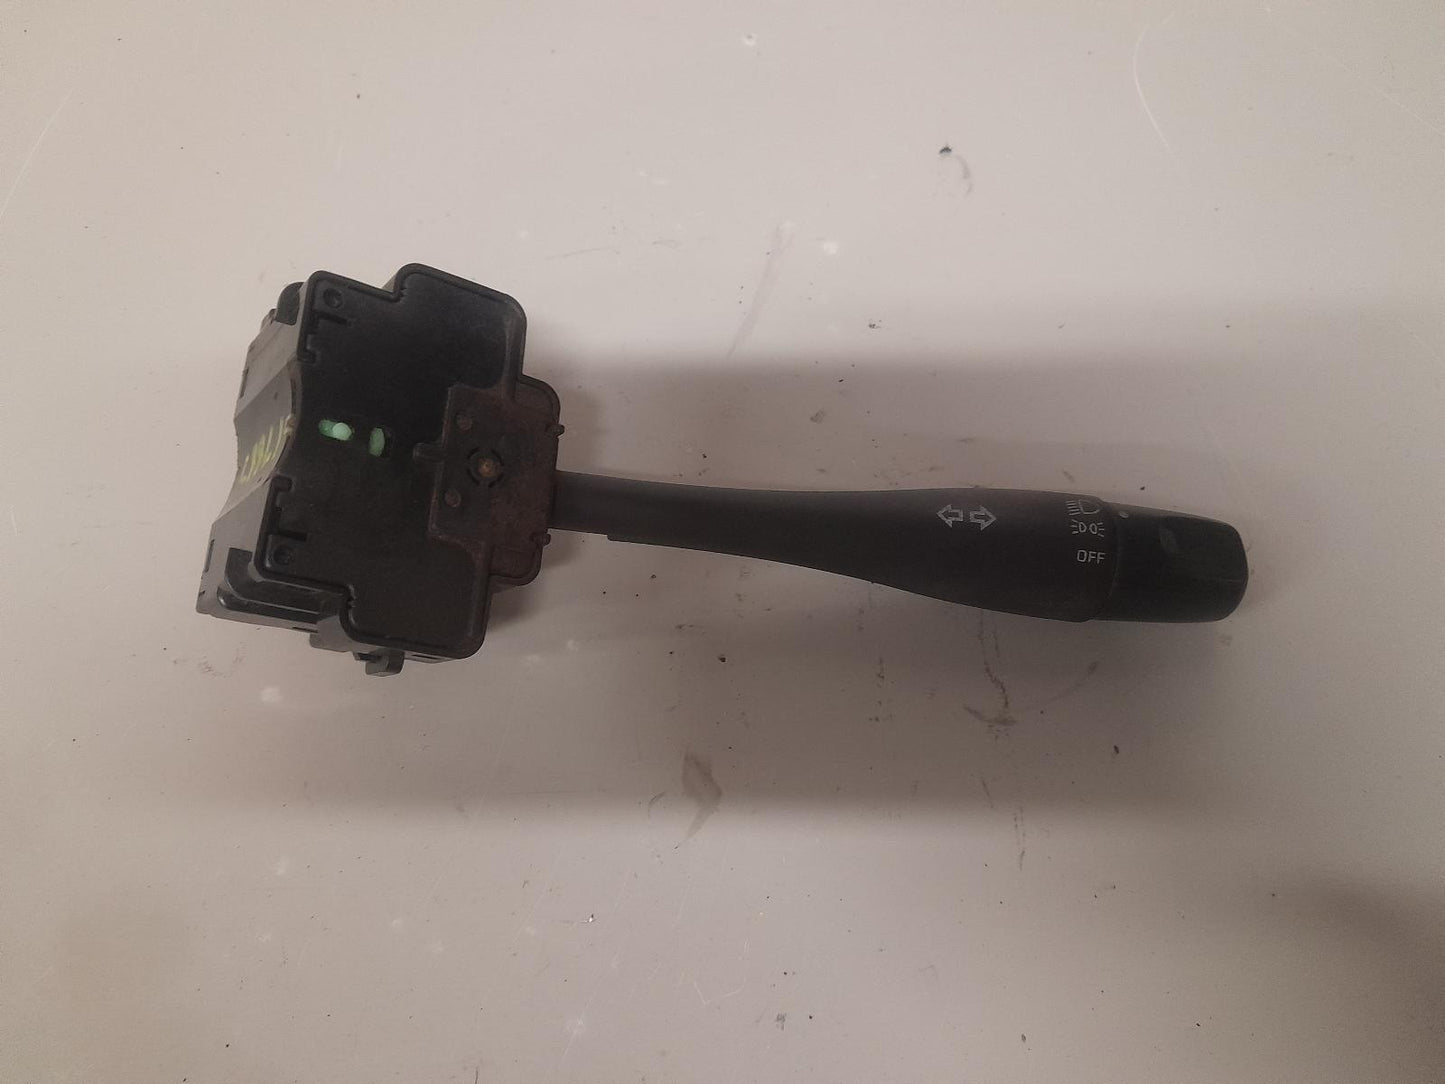 NISSAN NAVARA COMBINATION SWITCH D22, FLASHER SWITCH, W/ AIR BAG TYPE, 04/97-08/15